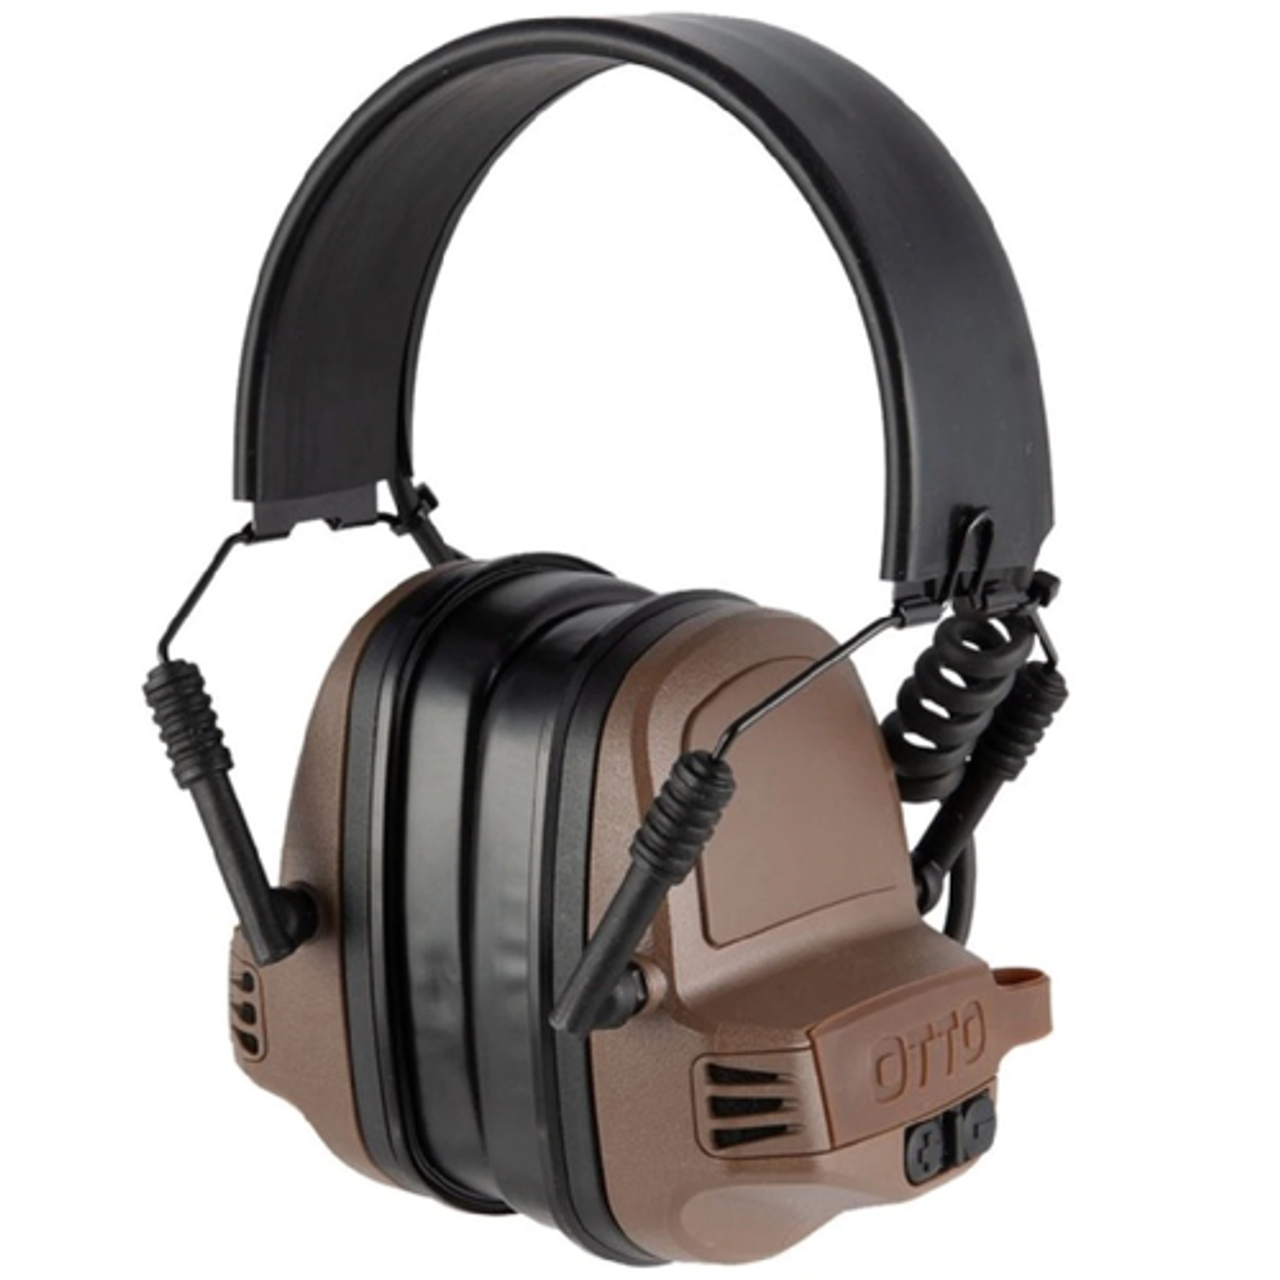 OTTO V4-11072FD NoizeBarrier Range Over - HiTech the Head Wireless SA Business Headset Tactical Radio - Store Two Way